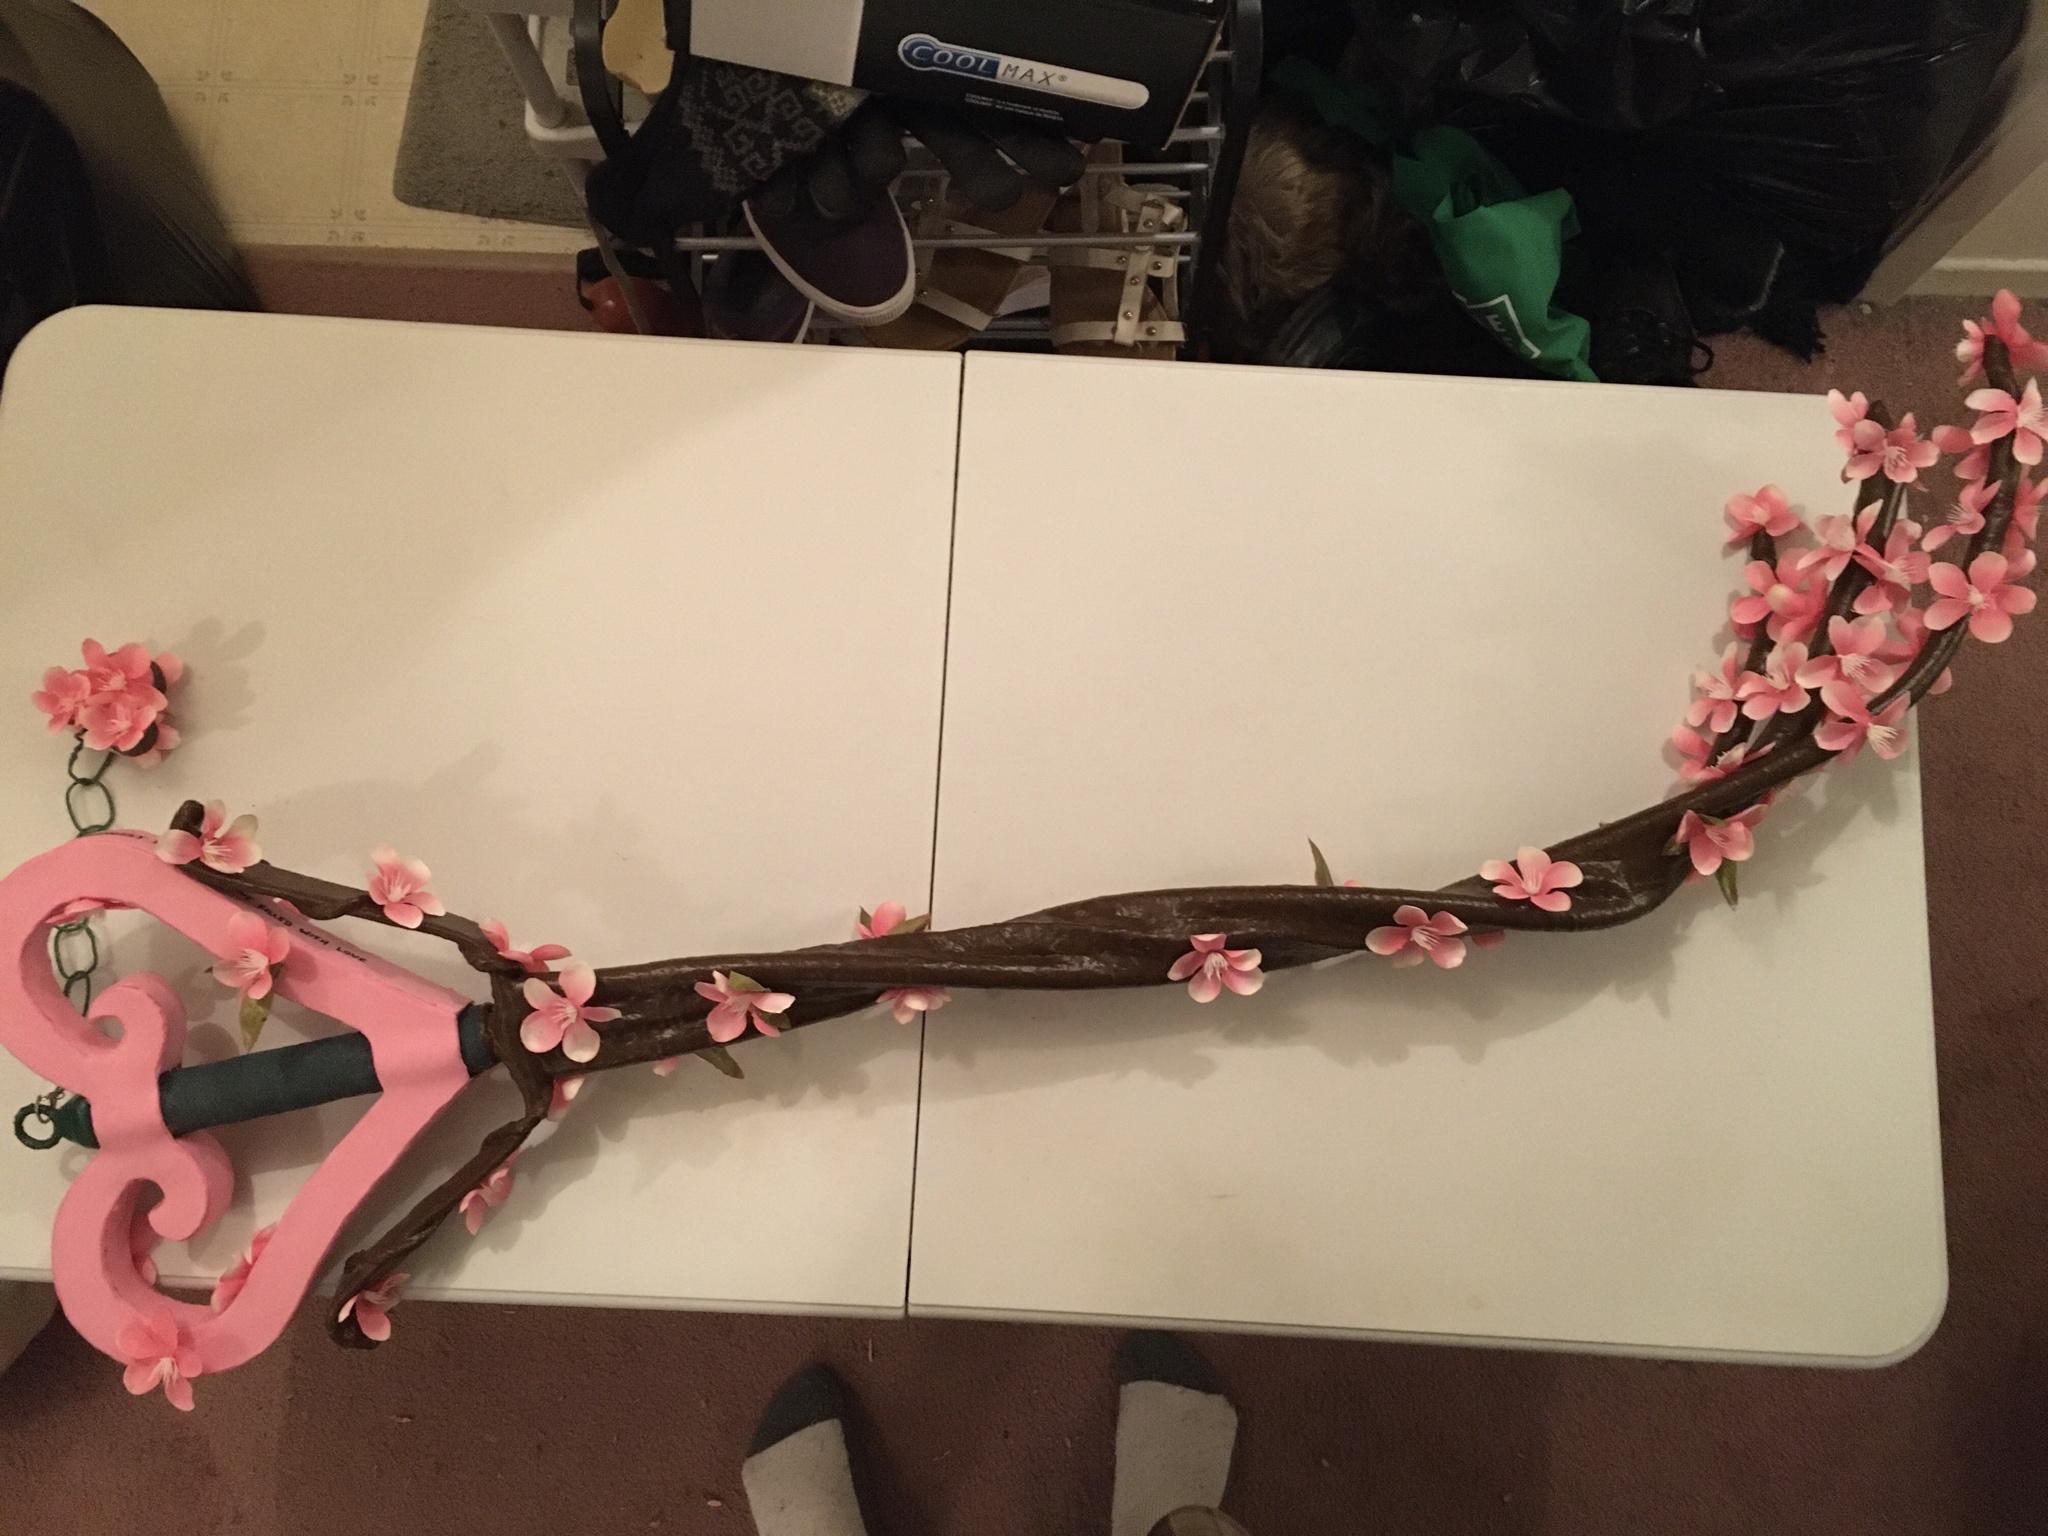 I invent props and cosplay. Here’s a personalised Keyblade I made for my wife – “The Love’s Blossom”